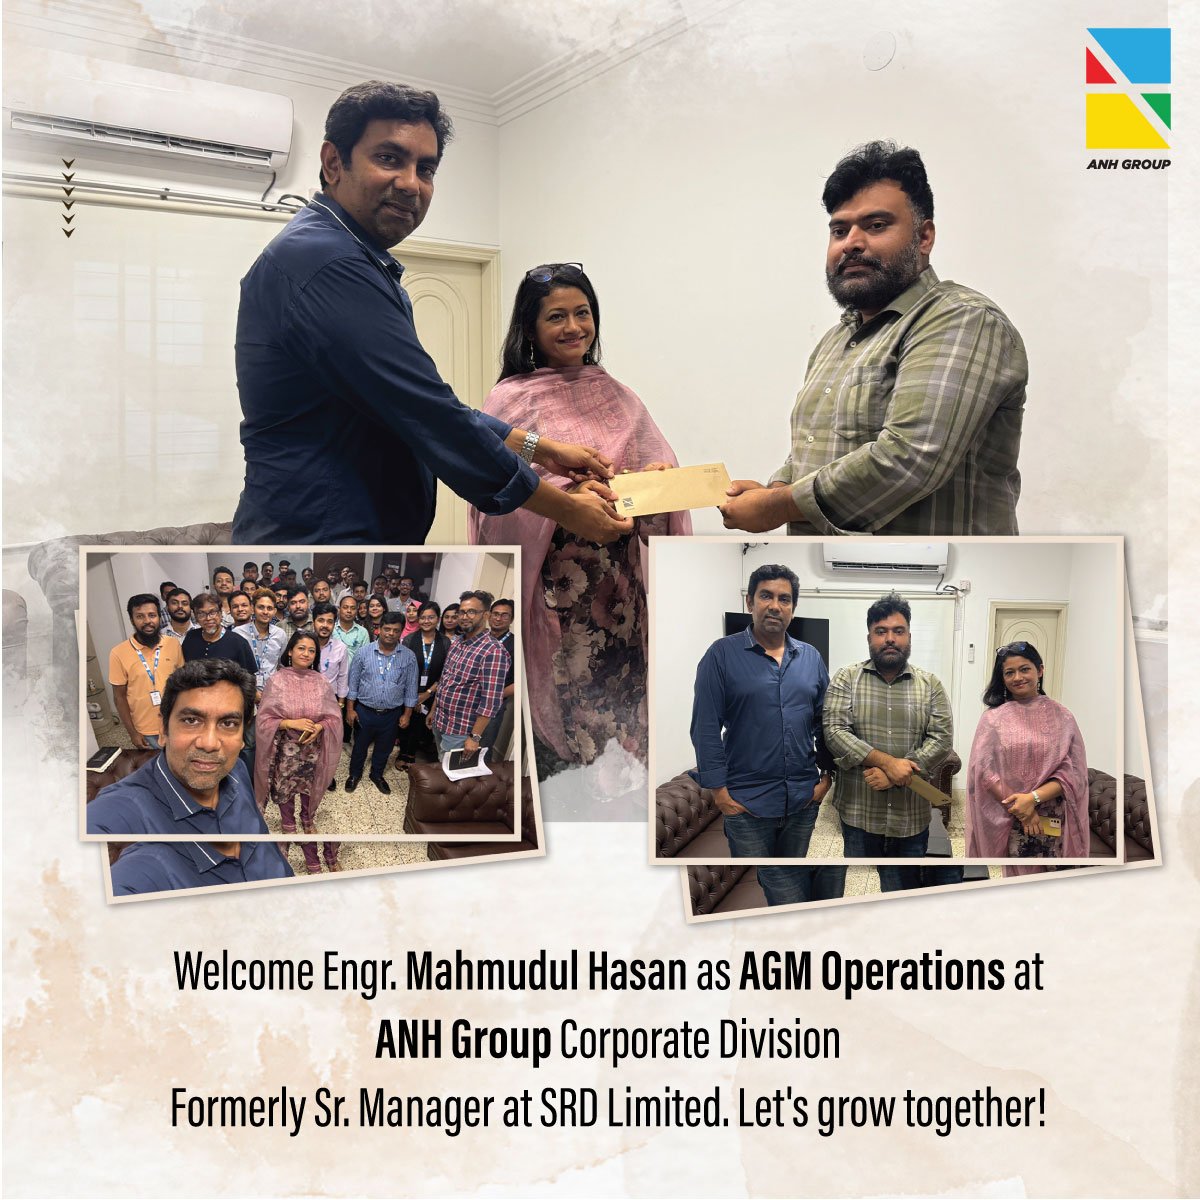 Welcoming Engr. Mahmudul Hasan as our new AGM Operations at ANH Group Corporate Office. Formerly Sr. Manager (Engineering) at SRD Limited, we look forward to his leadership driving our growth.